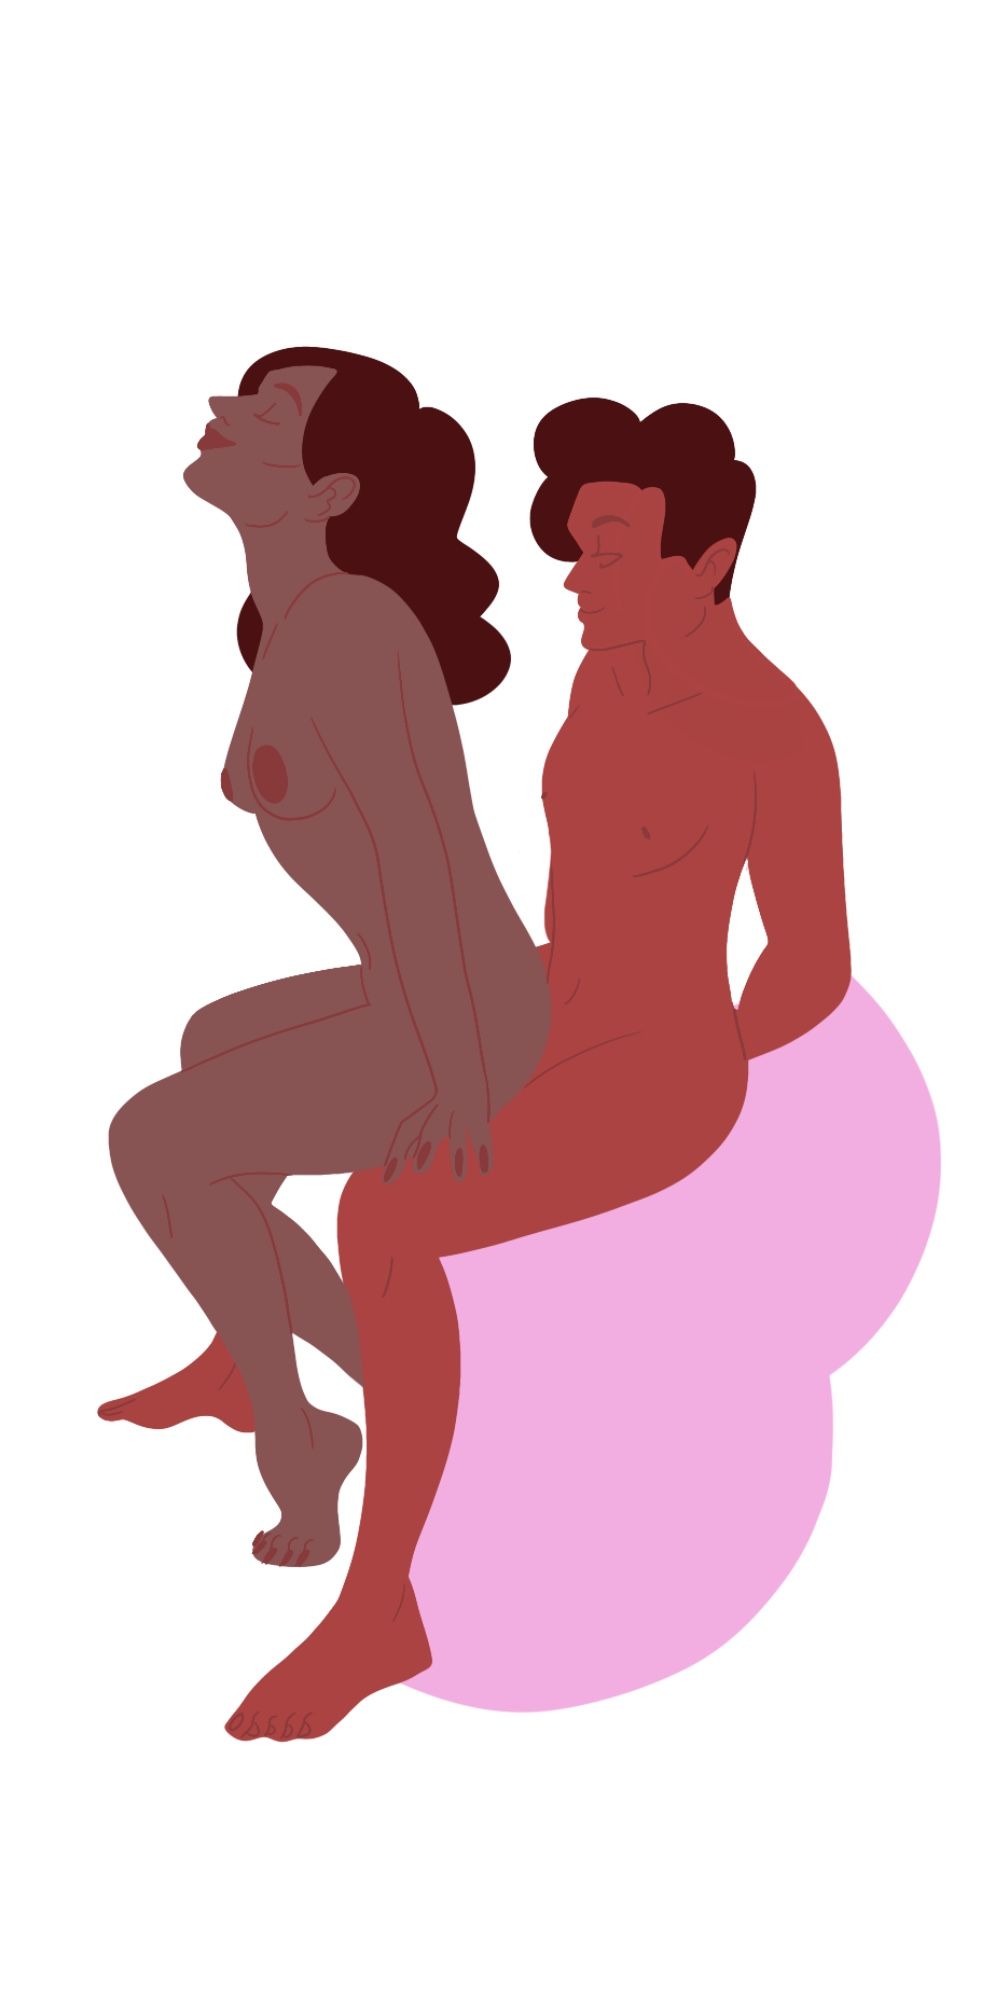 11 Steamy Hotel Sex Positions image